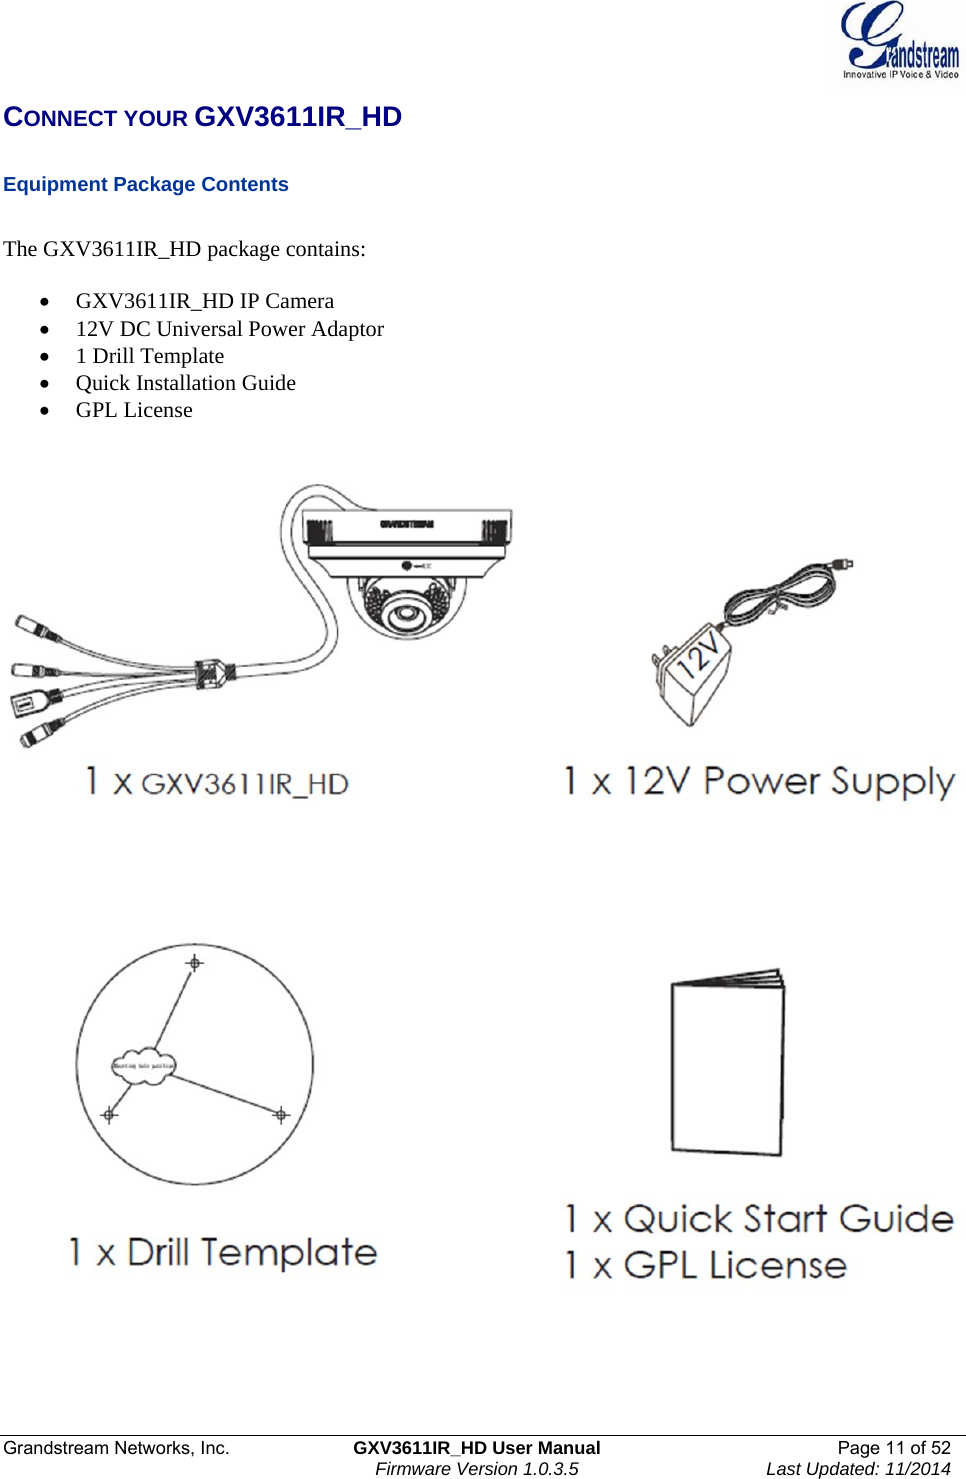  Grandstream Networks, Inc.  GXV3611IR_HD User Manual  Page 11 of 52    Firmware Version 1.0.3.5  Last Updated: 11/2014 CONNECT YOUR GXV3611IR_HD   Equipment Package Contents  The GXV3611IR_HD package contains:       GXV3611IR_HD IP Camera  12V DC Universal Power Adaptor  1 Drill Template  Quick Installation Guide  GPL License      